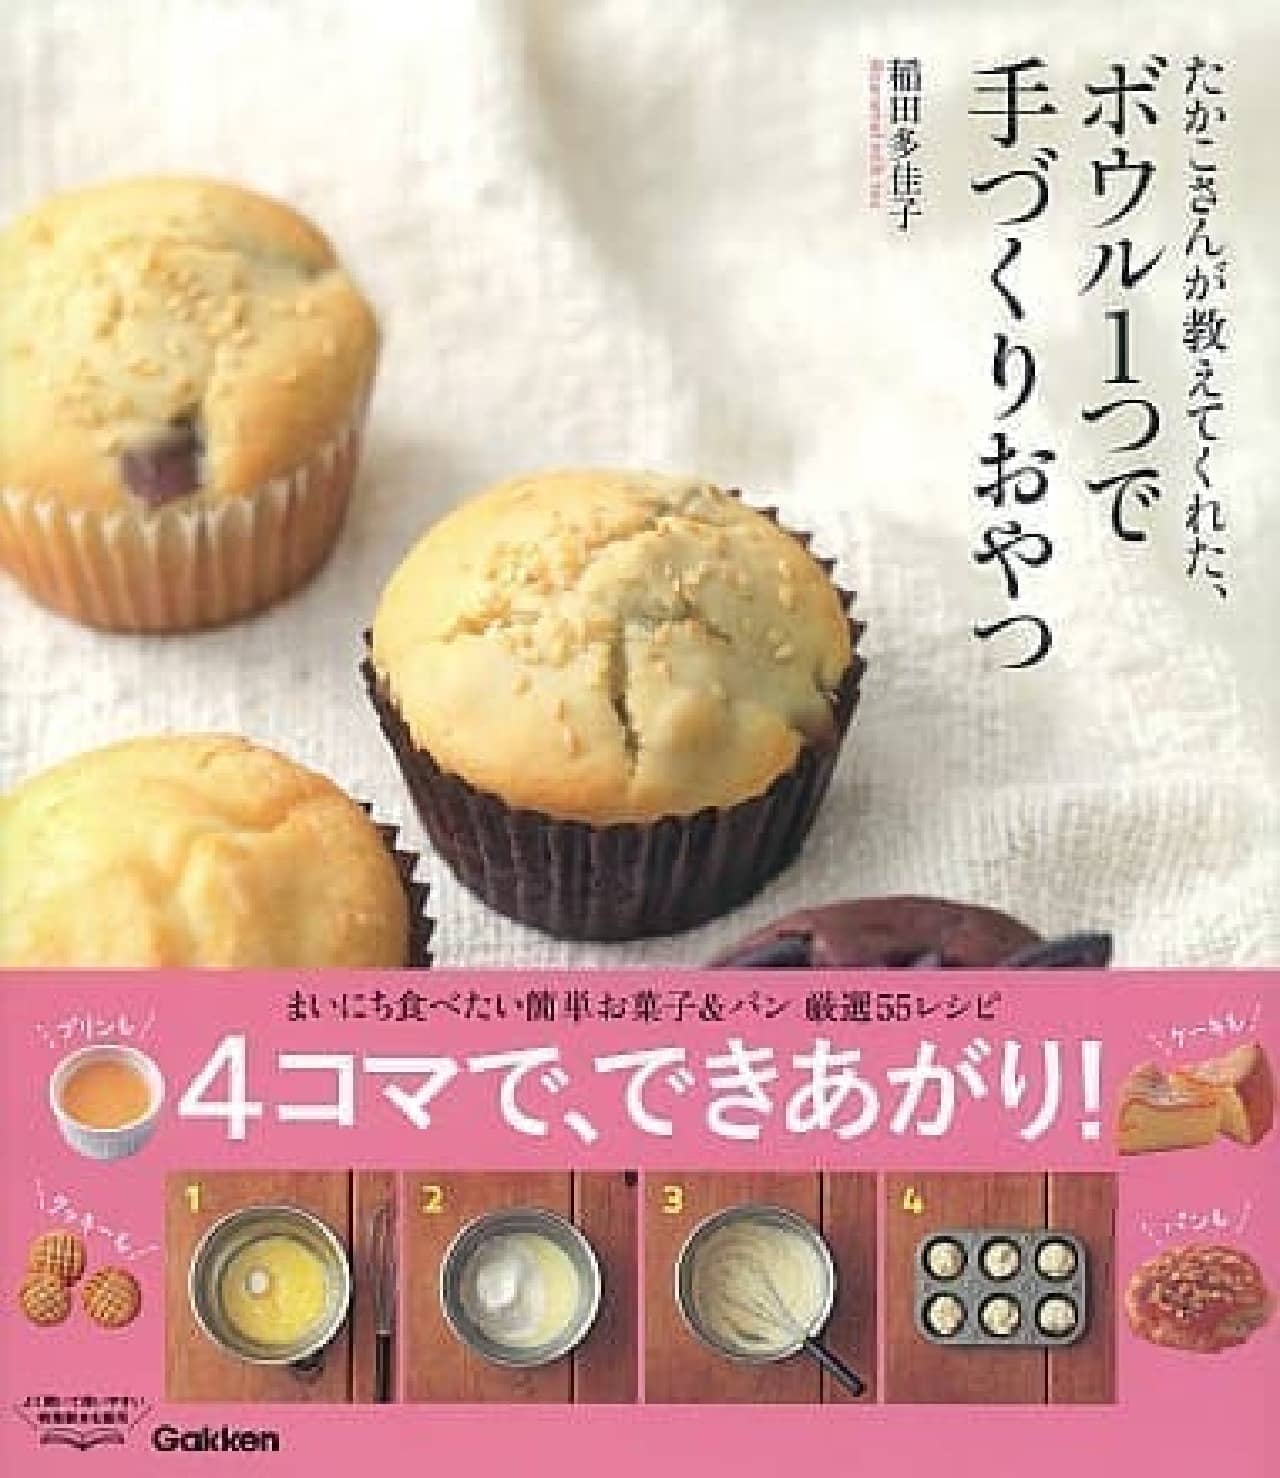 Recipe book "Handmade snack with one bowl, taught by Takako"